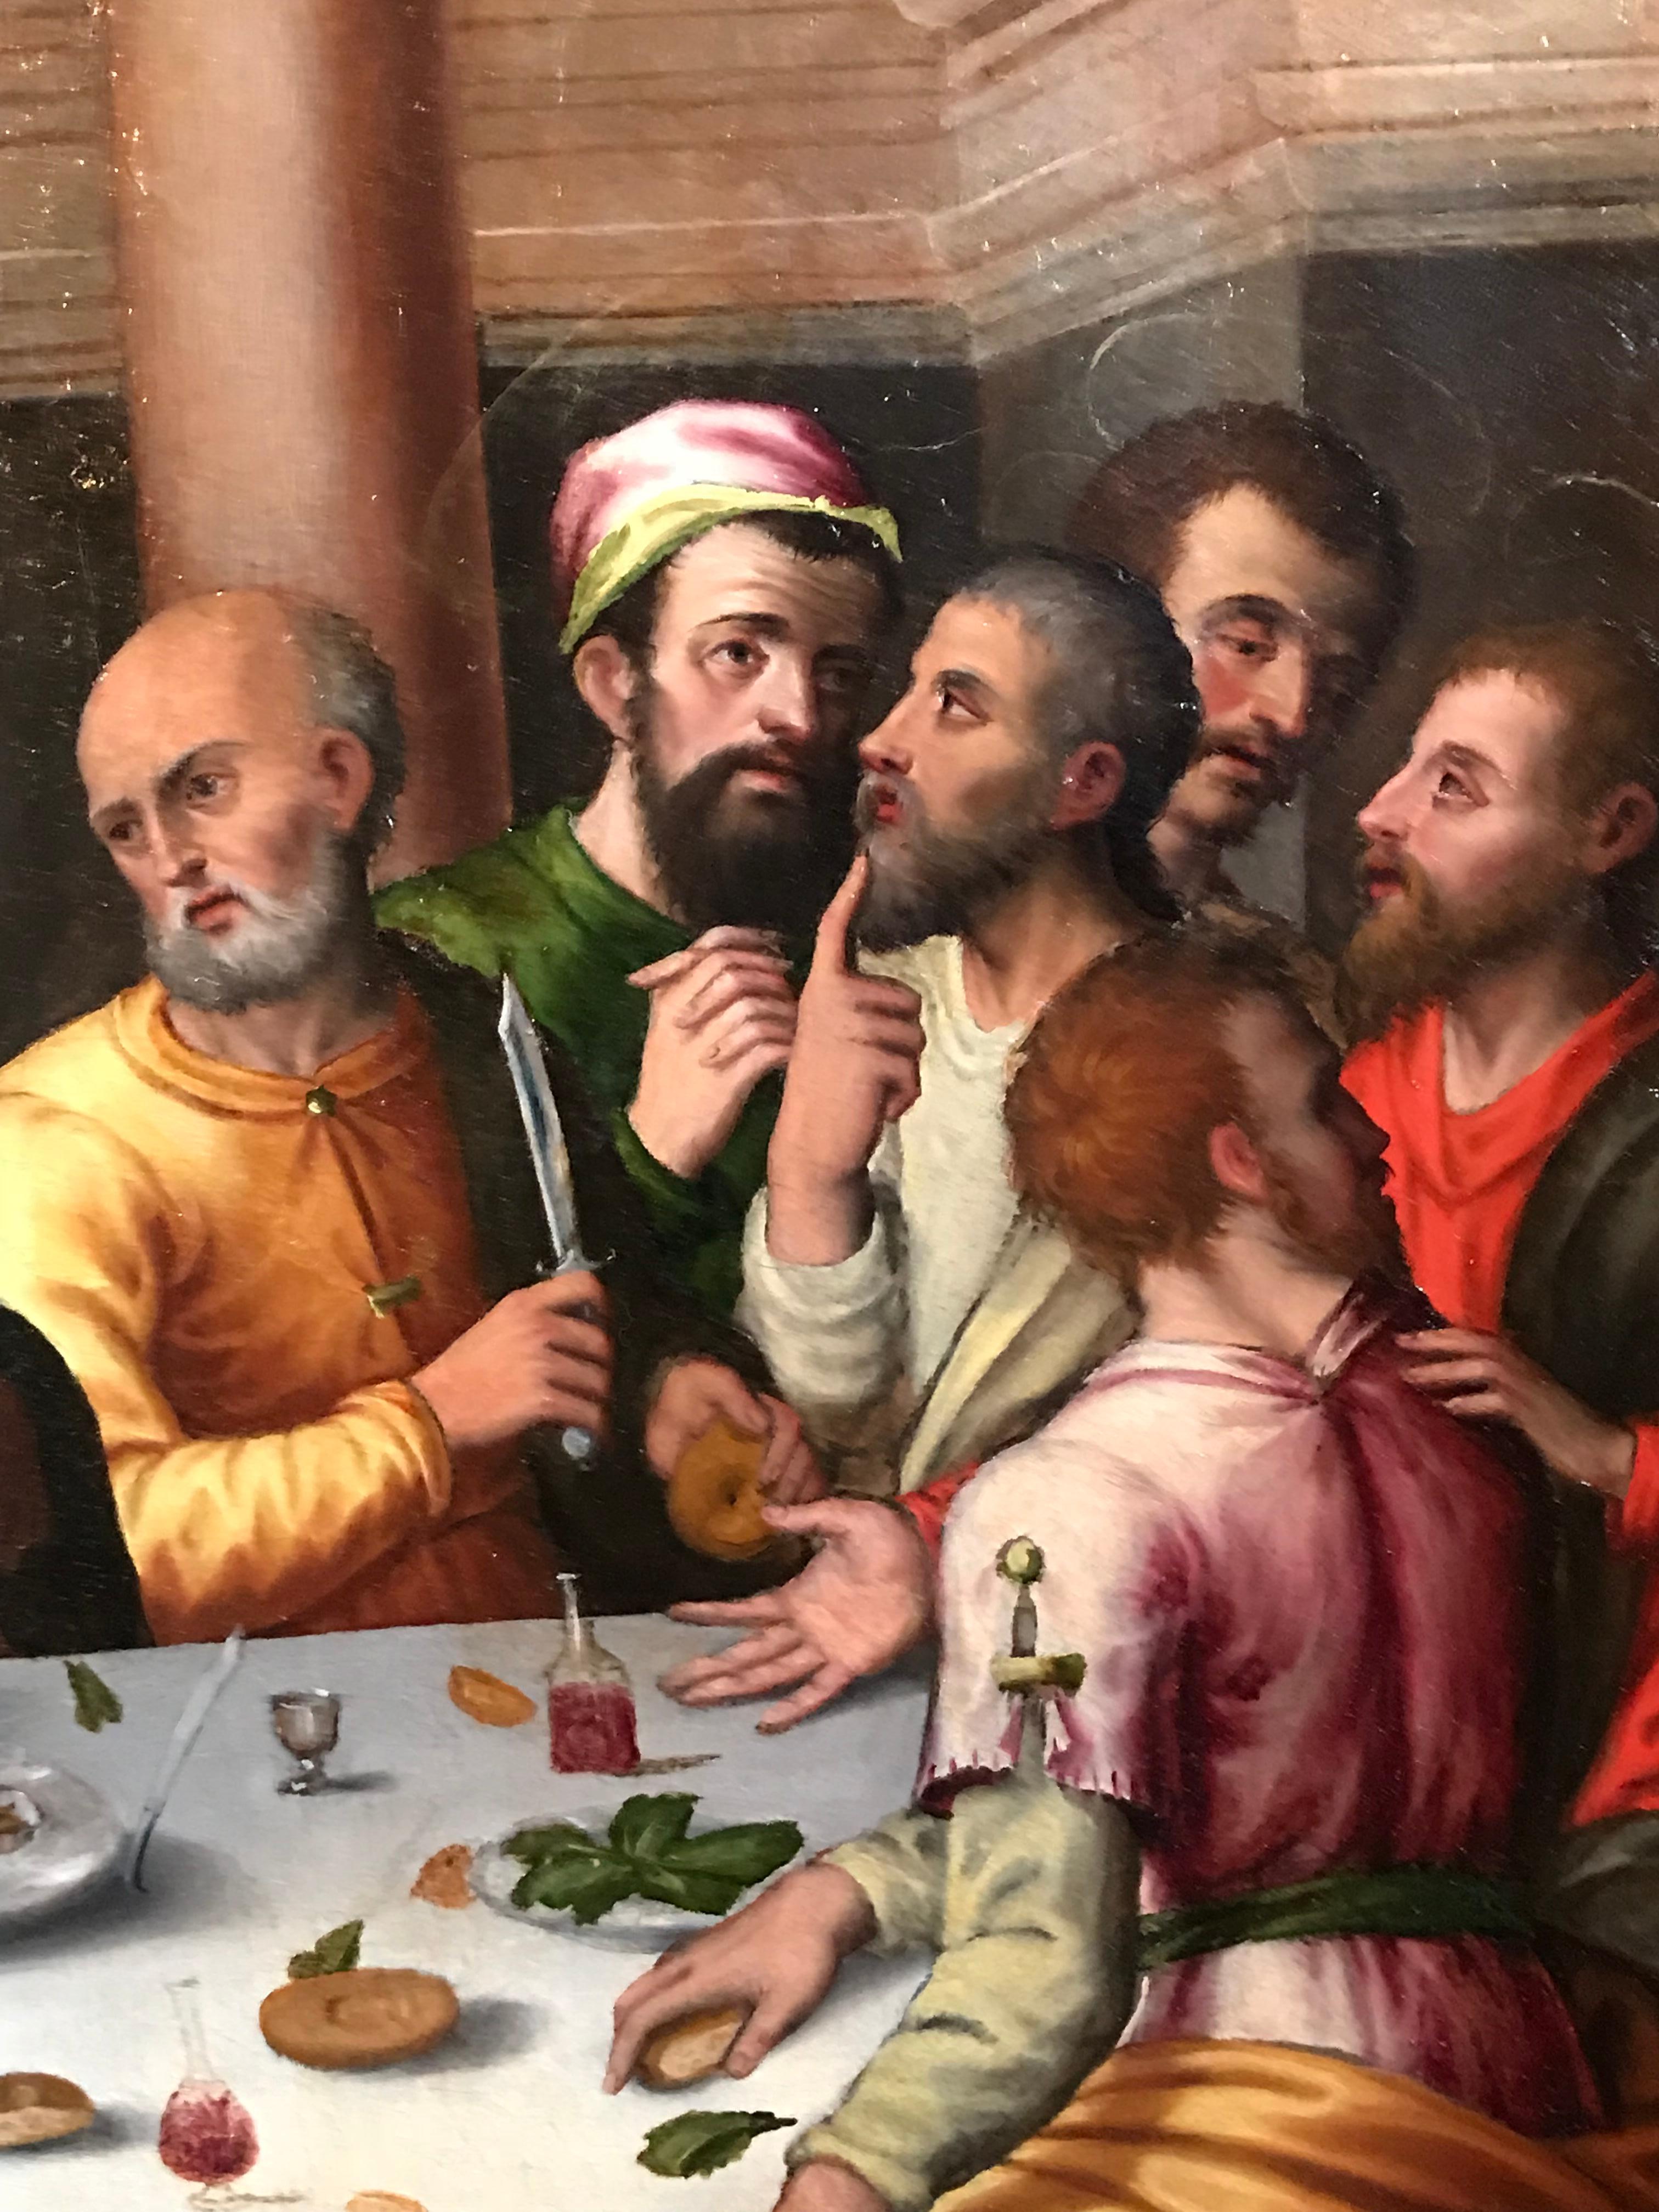 The Last Supper
Workshop of Juan de Flandes (Netherlands, circa 1460-1519)
oil on panel, framed
framed size: 32 x 35 inches
provenance: private collection, France

Very rare early Old Master oil painting dating to circa 1500. The work can be